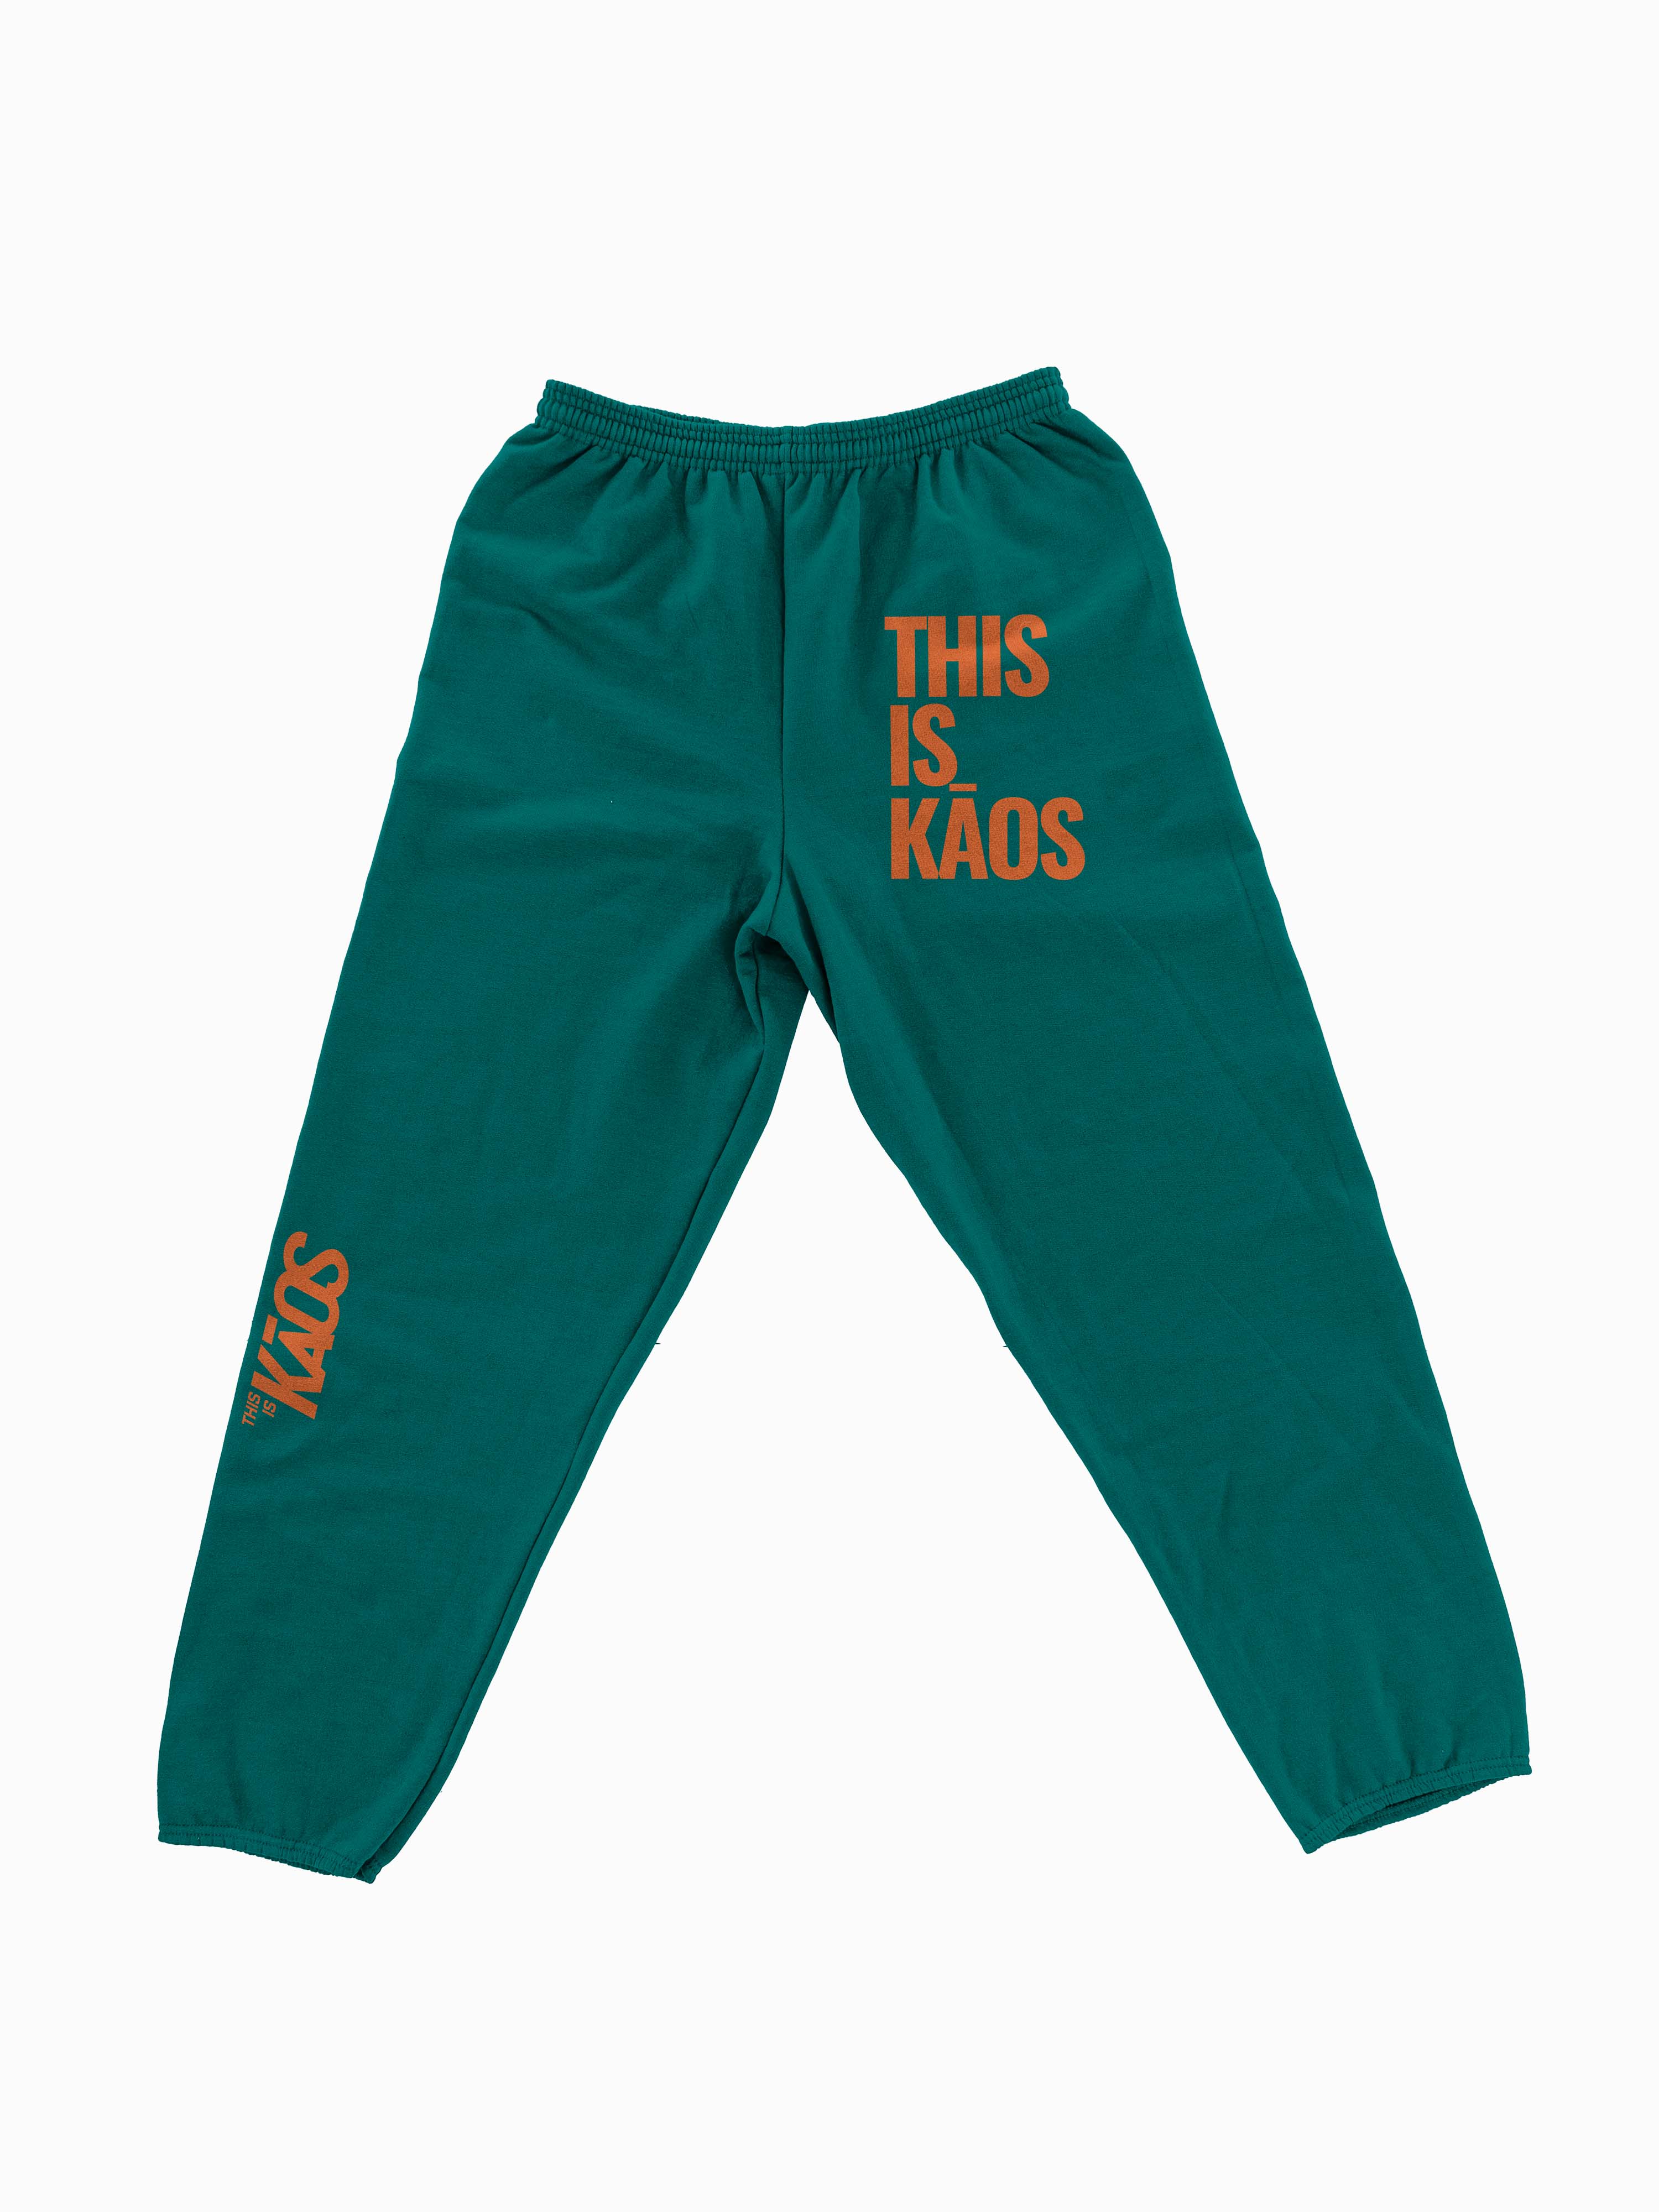 Cream Flame Sweats – This Is Kāos